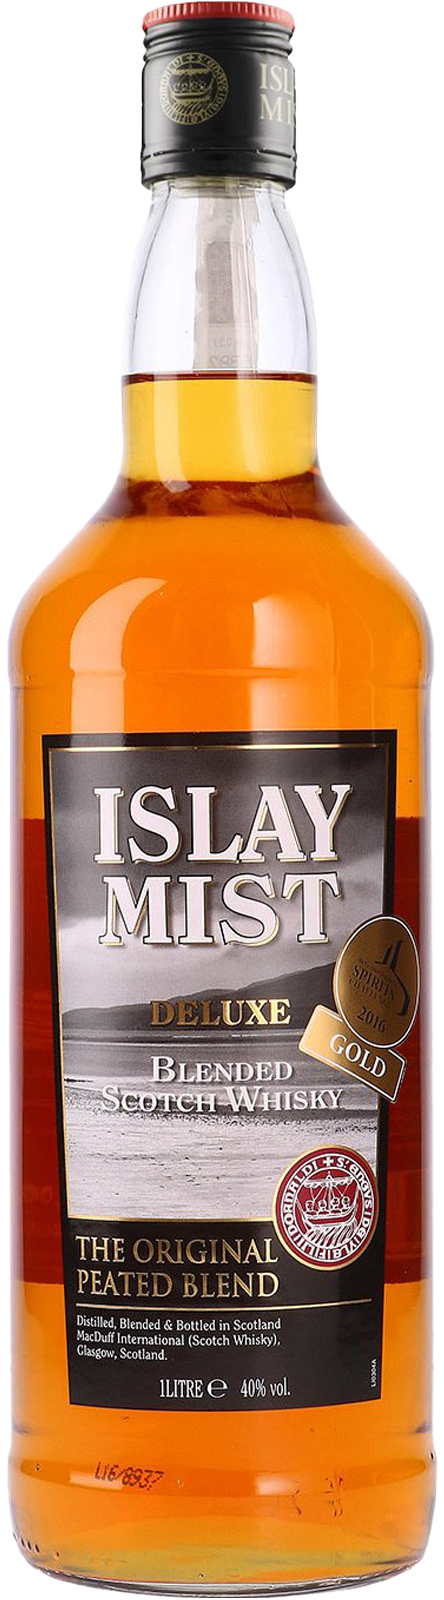 Islay Mist Deluxe 0,7 l - Scotch Blend